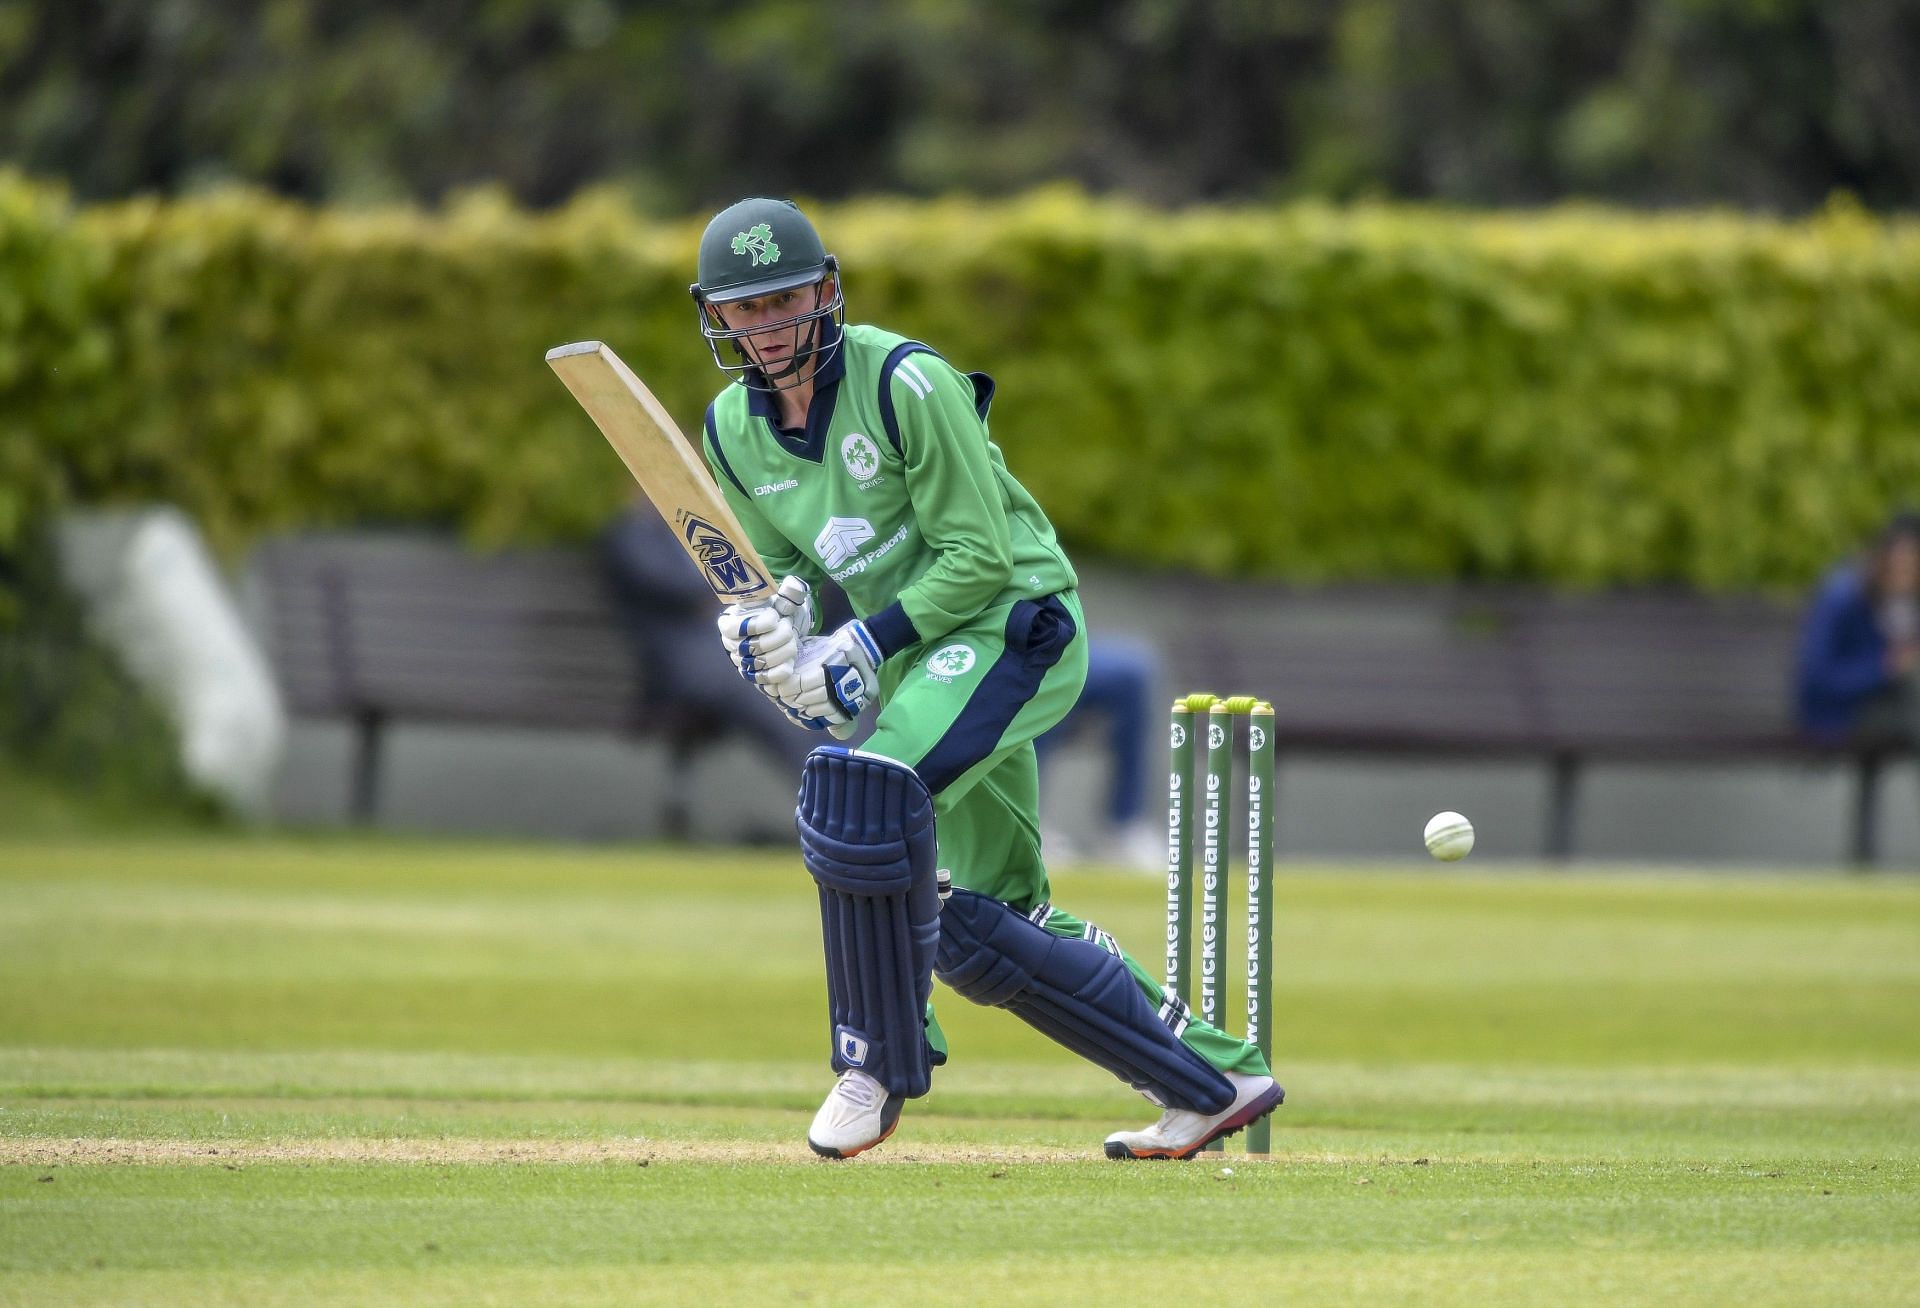 Stephen Doheny in action for Ireland (Image Credits: ICC Cricket World Cup)